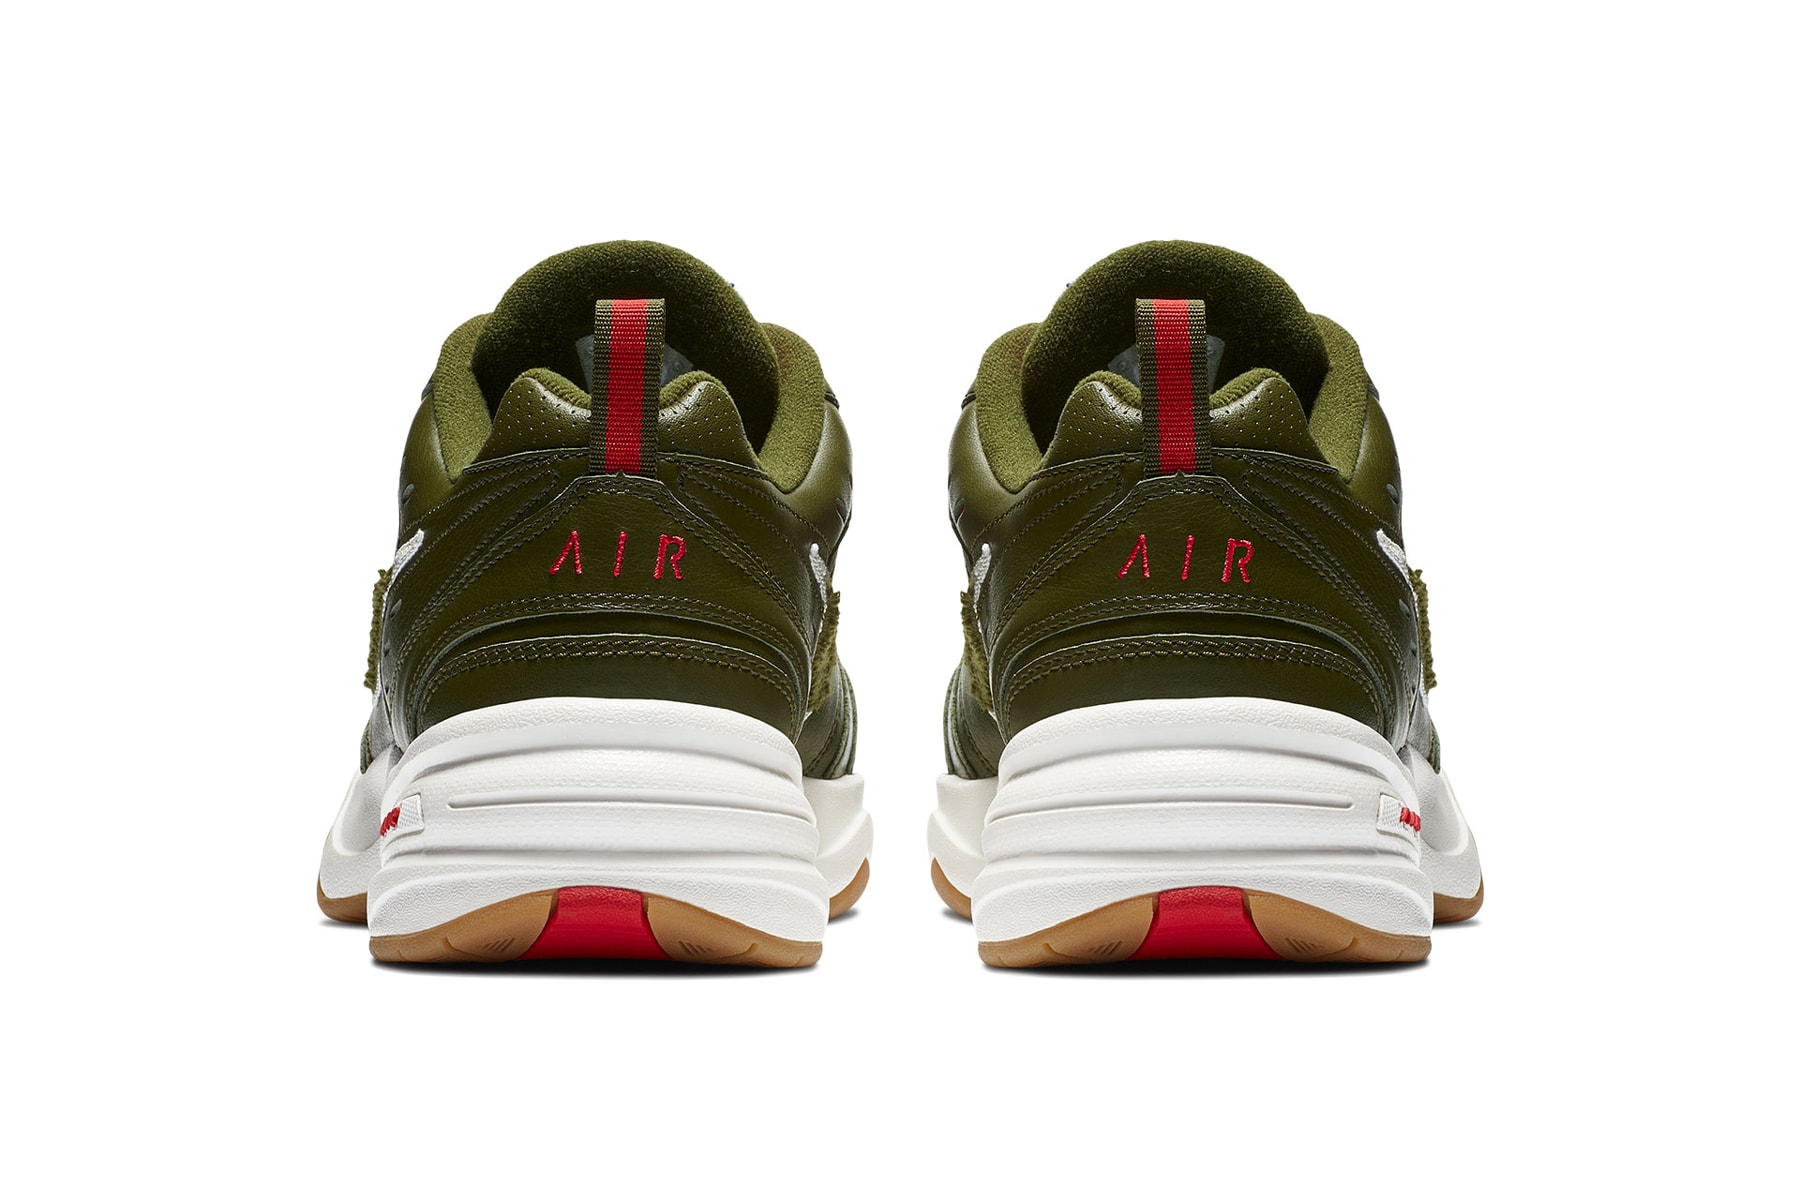 Nike Air Monarch IV 全新配色設計「Weekend Campout」